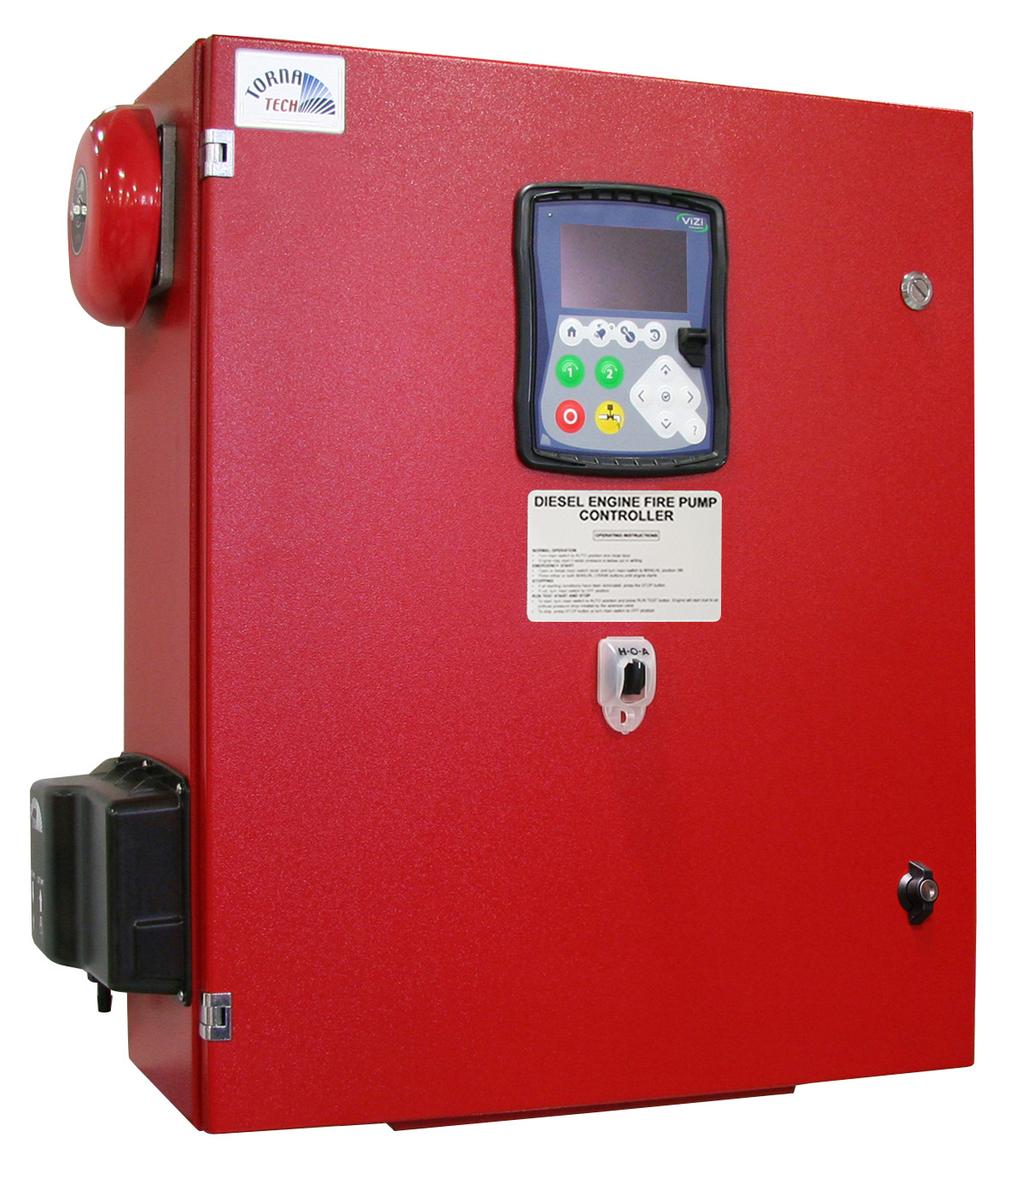 Options for Diesel Fire Pump Controllers 2015-2016 This document describes our standard